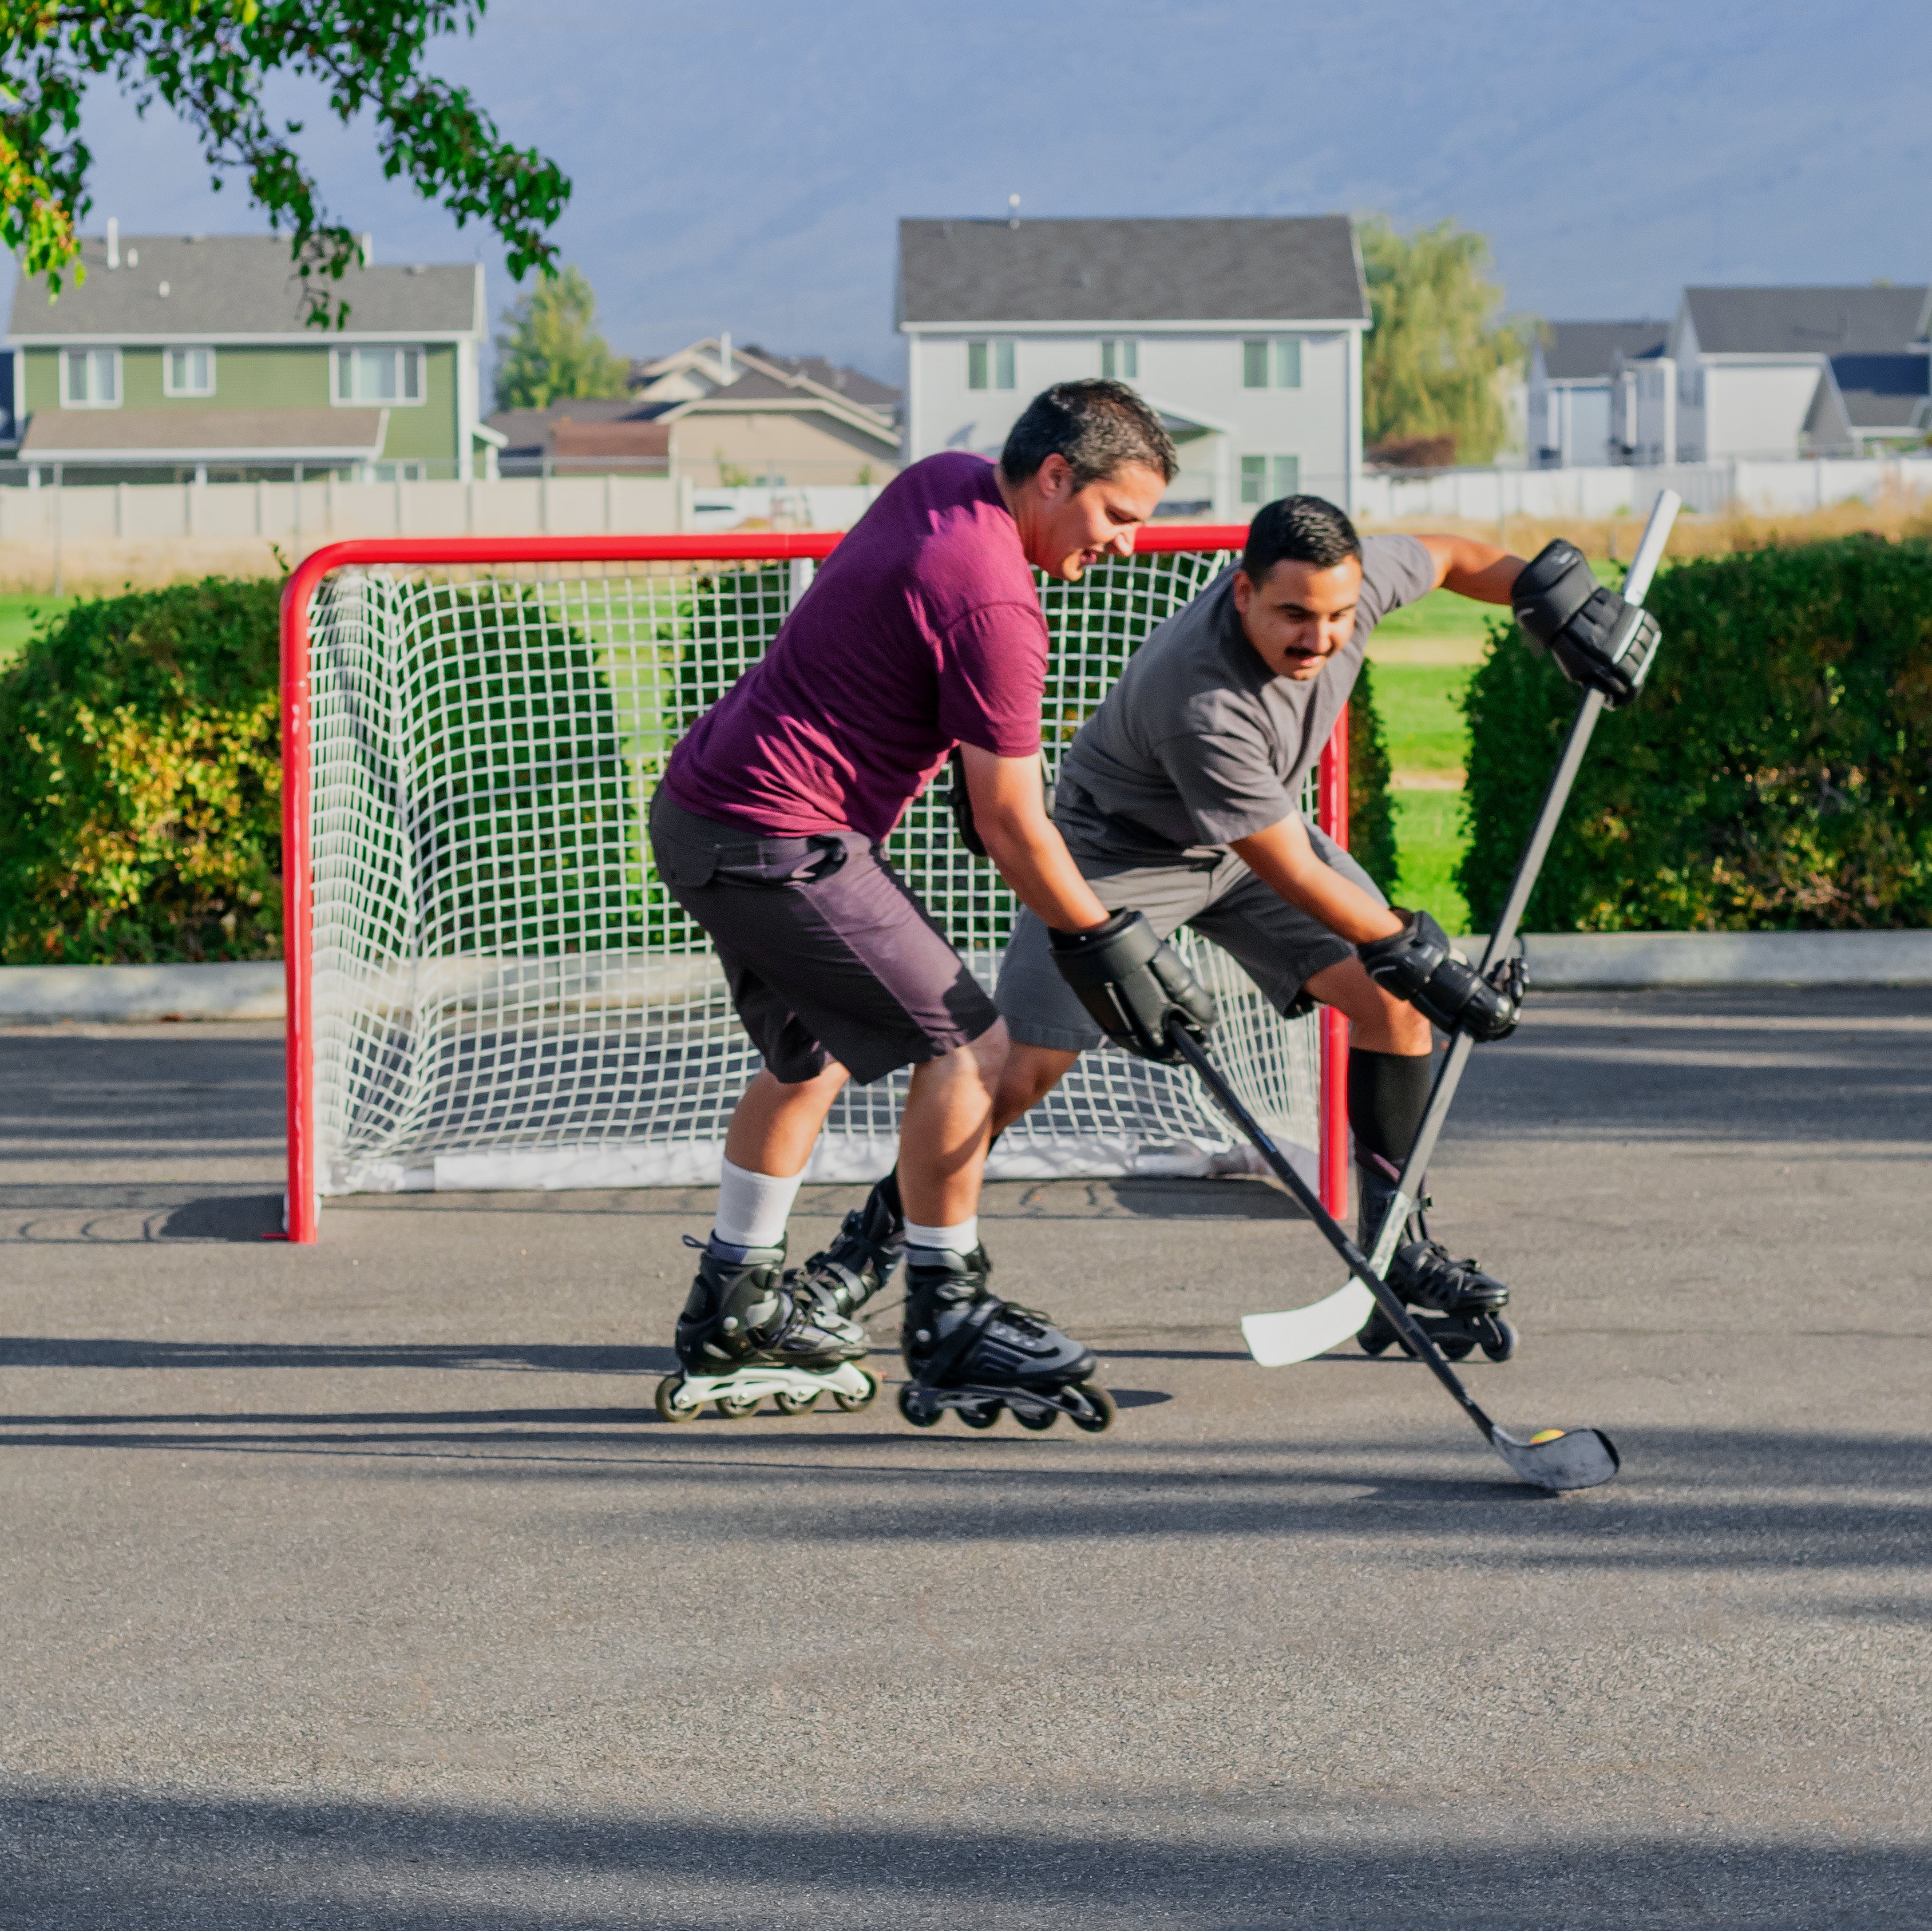 Two men in roller blades play street hockey with the hockey goal.